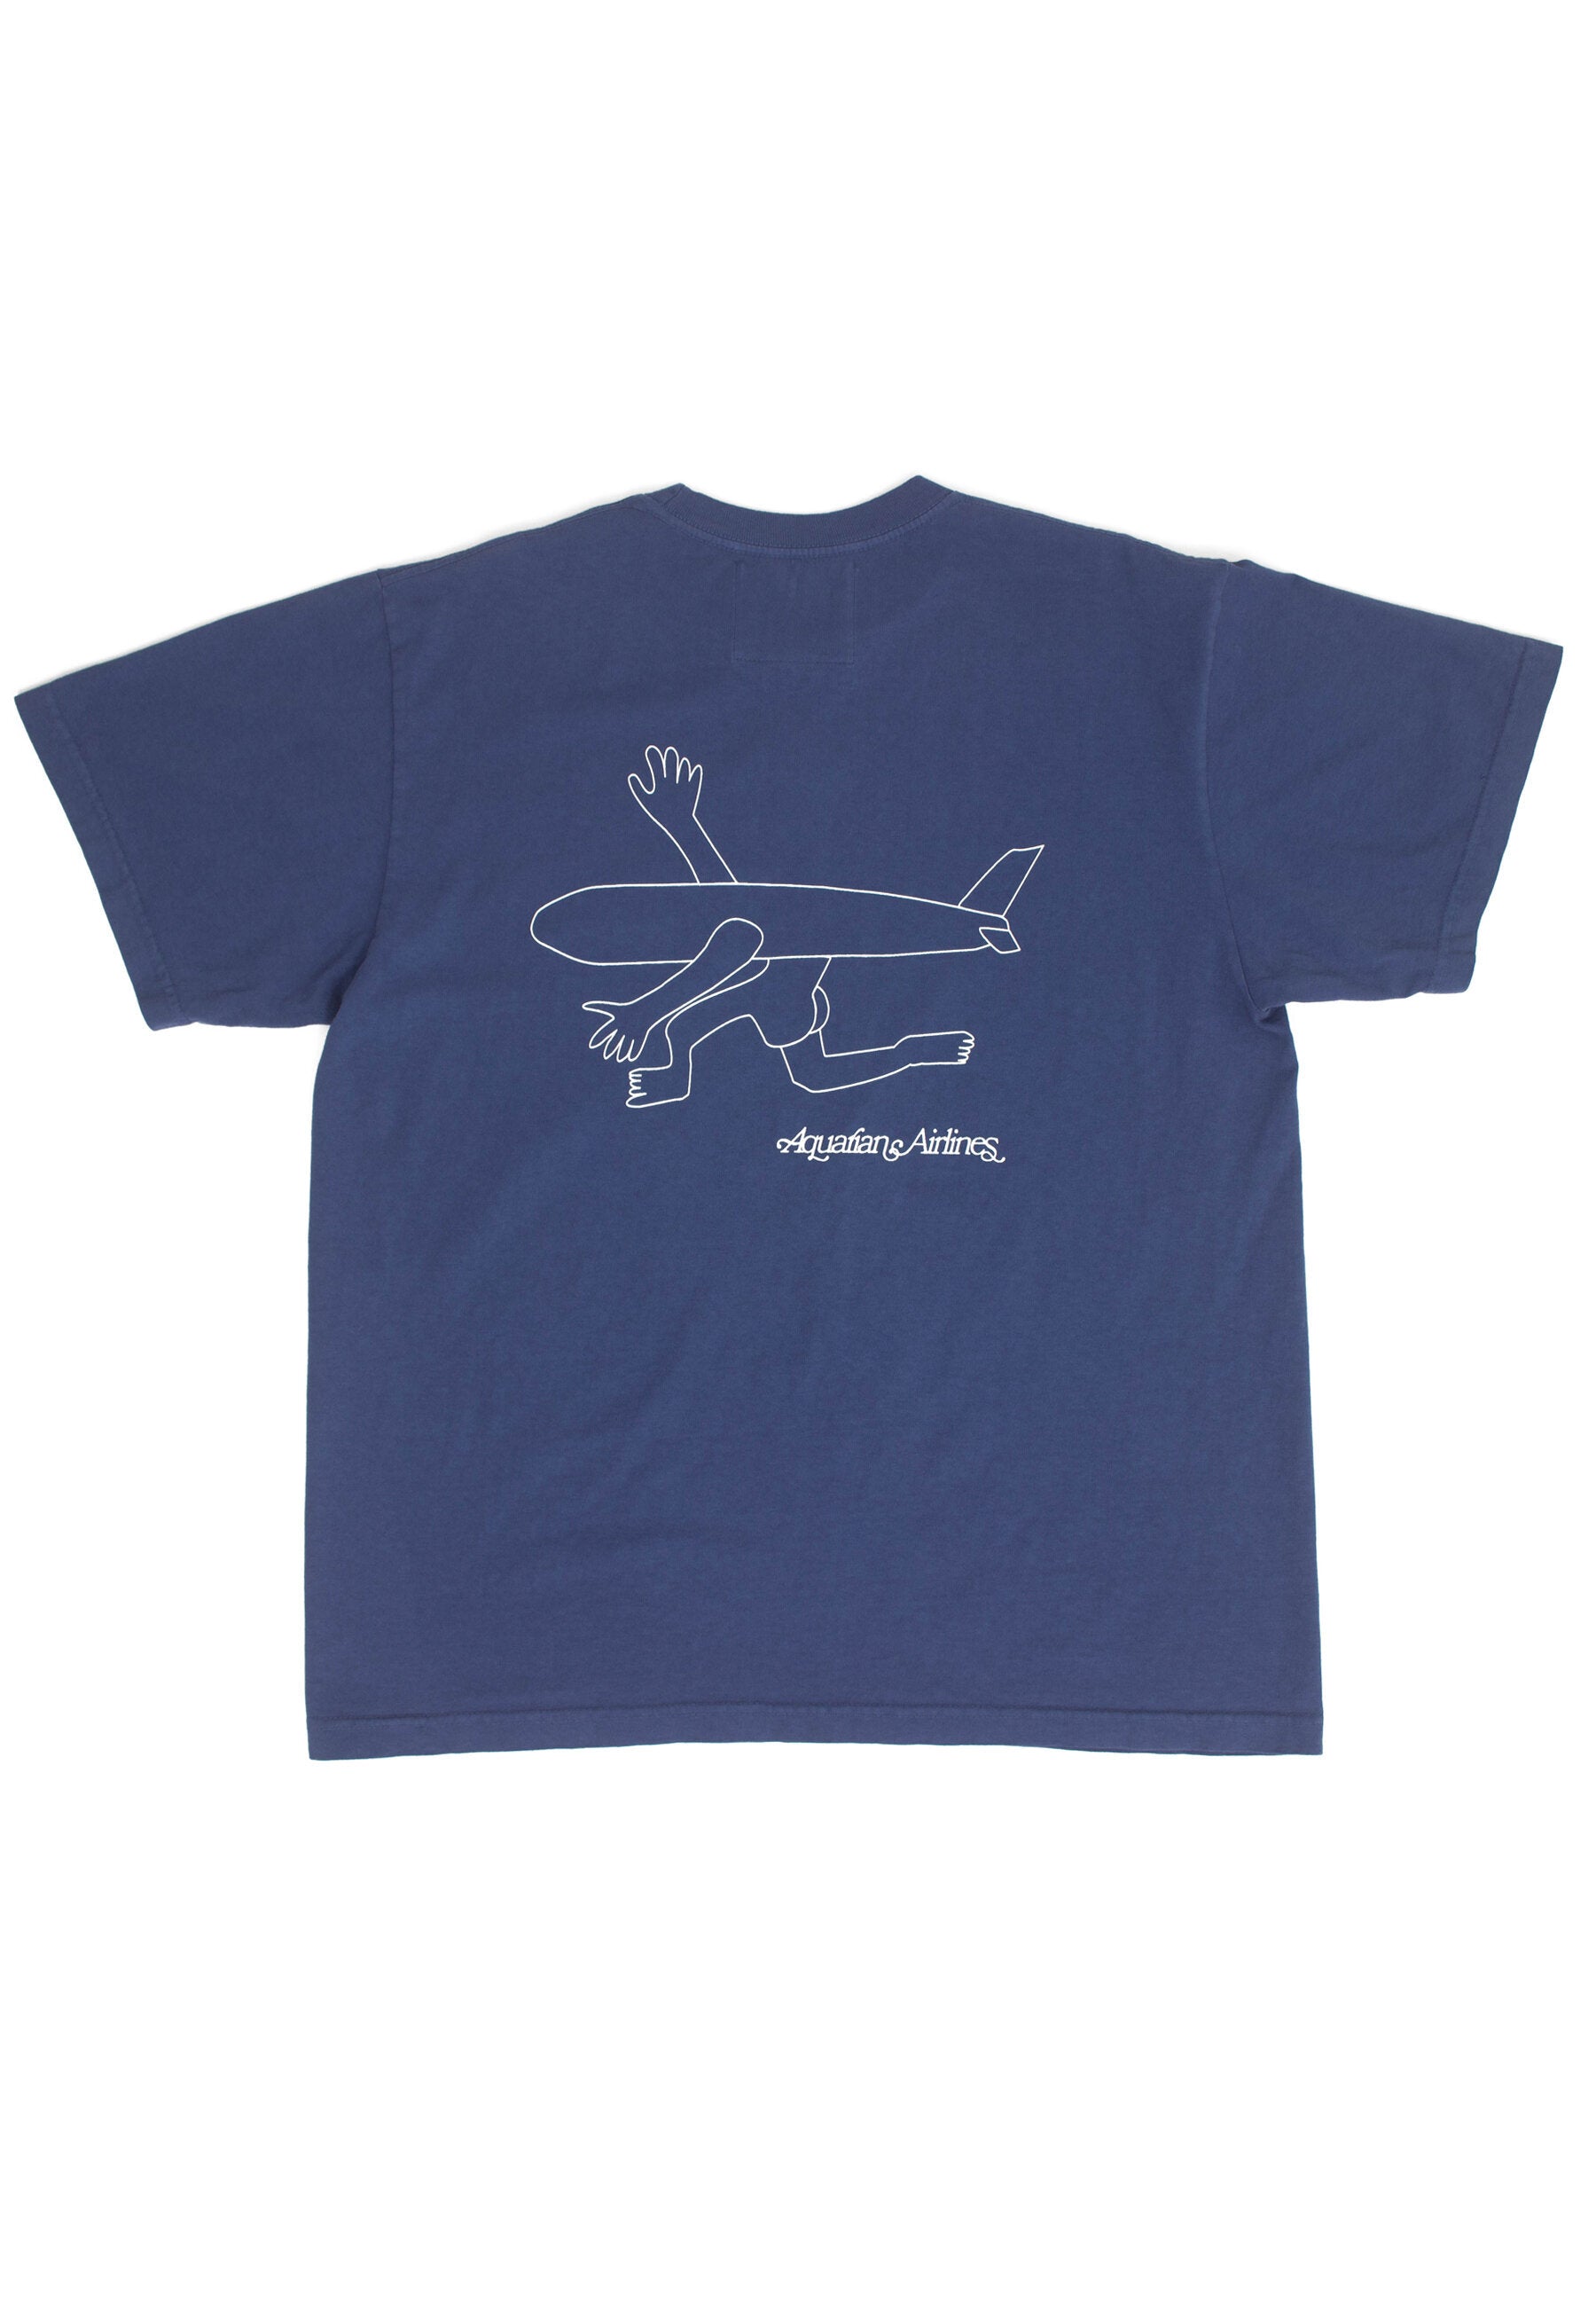 Aquarian Airlines Tee - Warm Blue-Mister Green-Mister Green